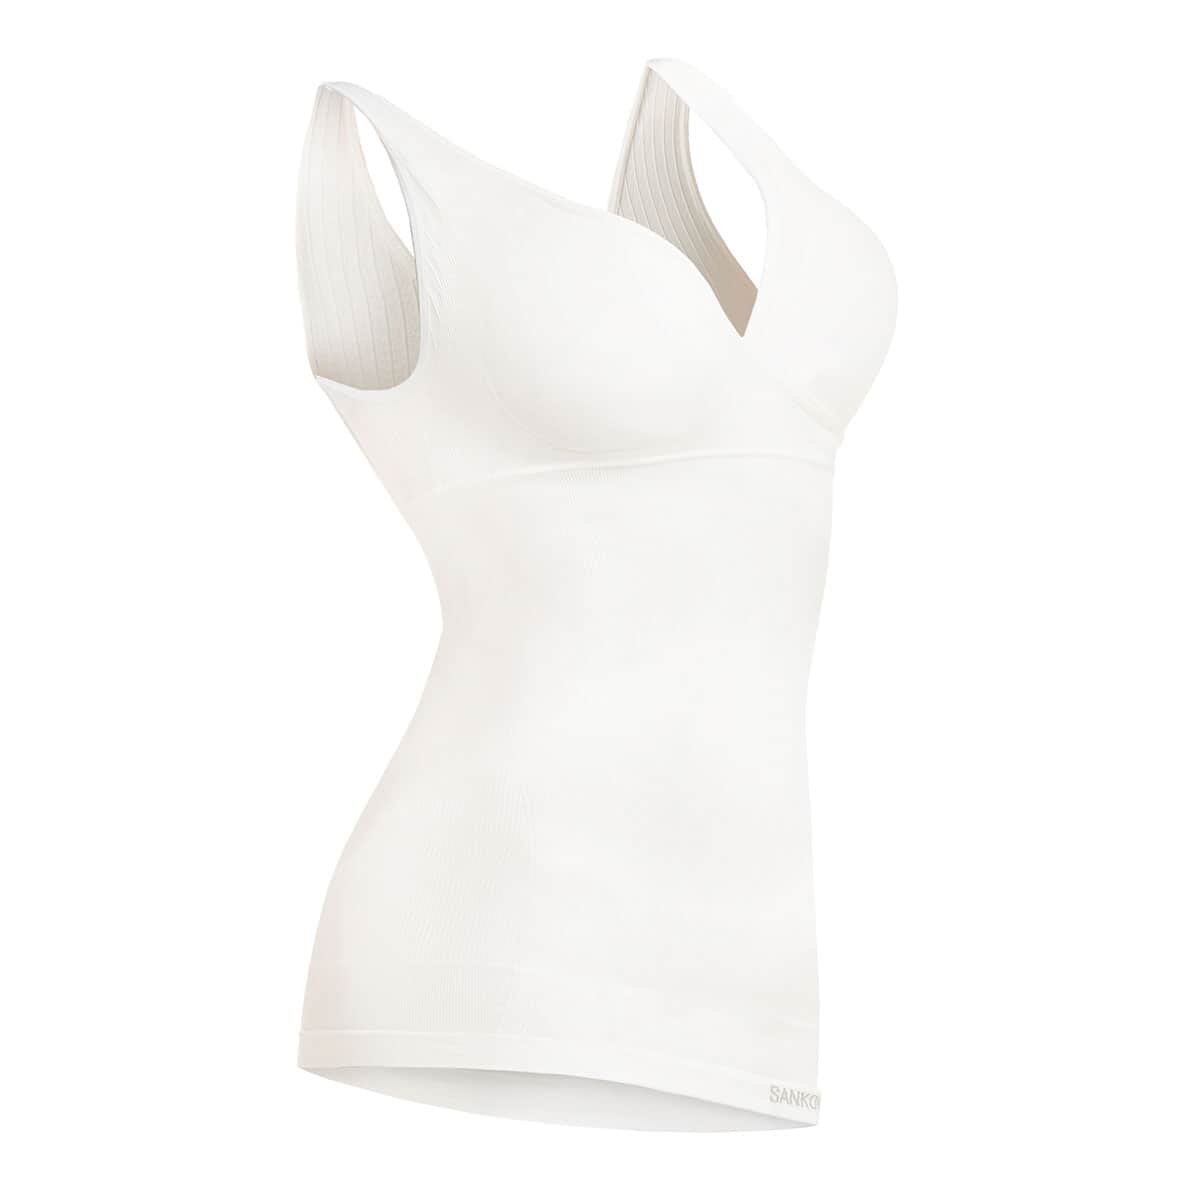 Buy SANKOM Patent Set of 2 Classic Body Shaping Padded Camisole with  Built-in Bra (S/M, Black & Beige) at ShopLC.